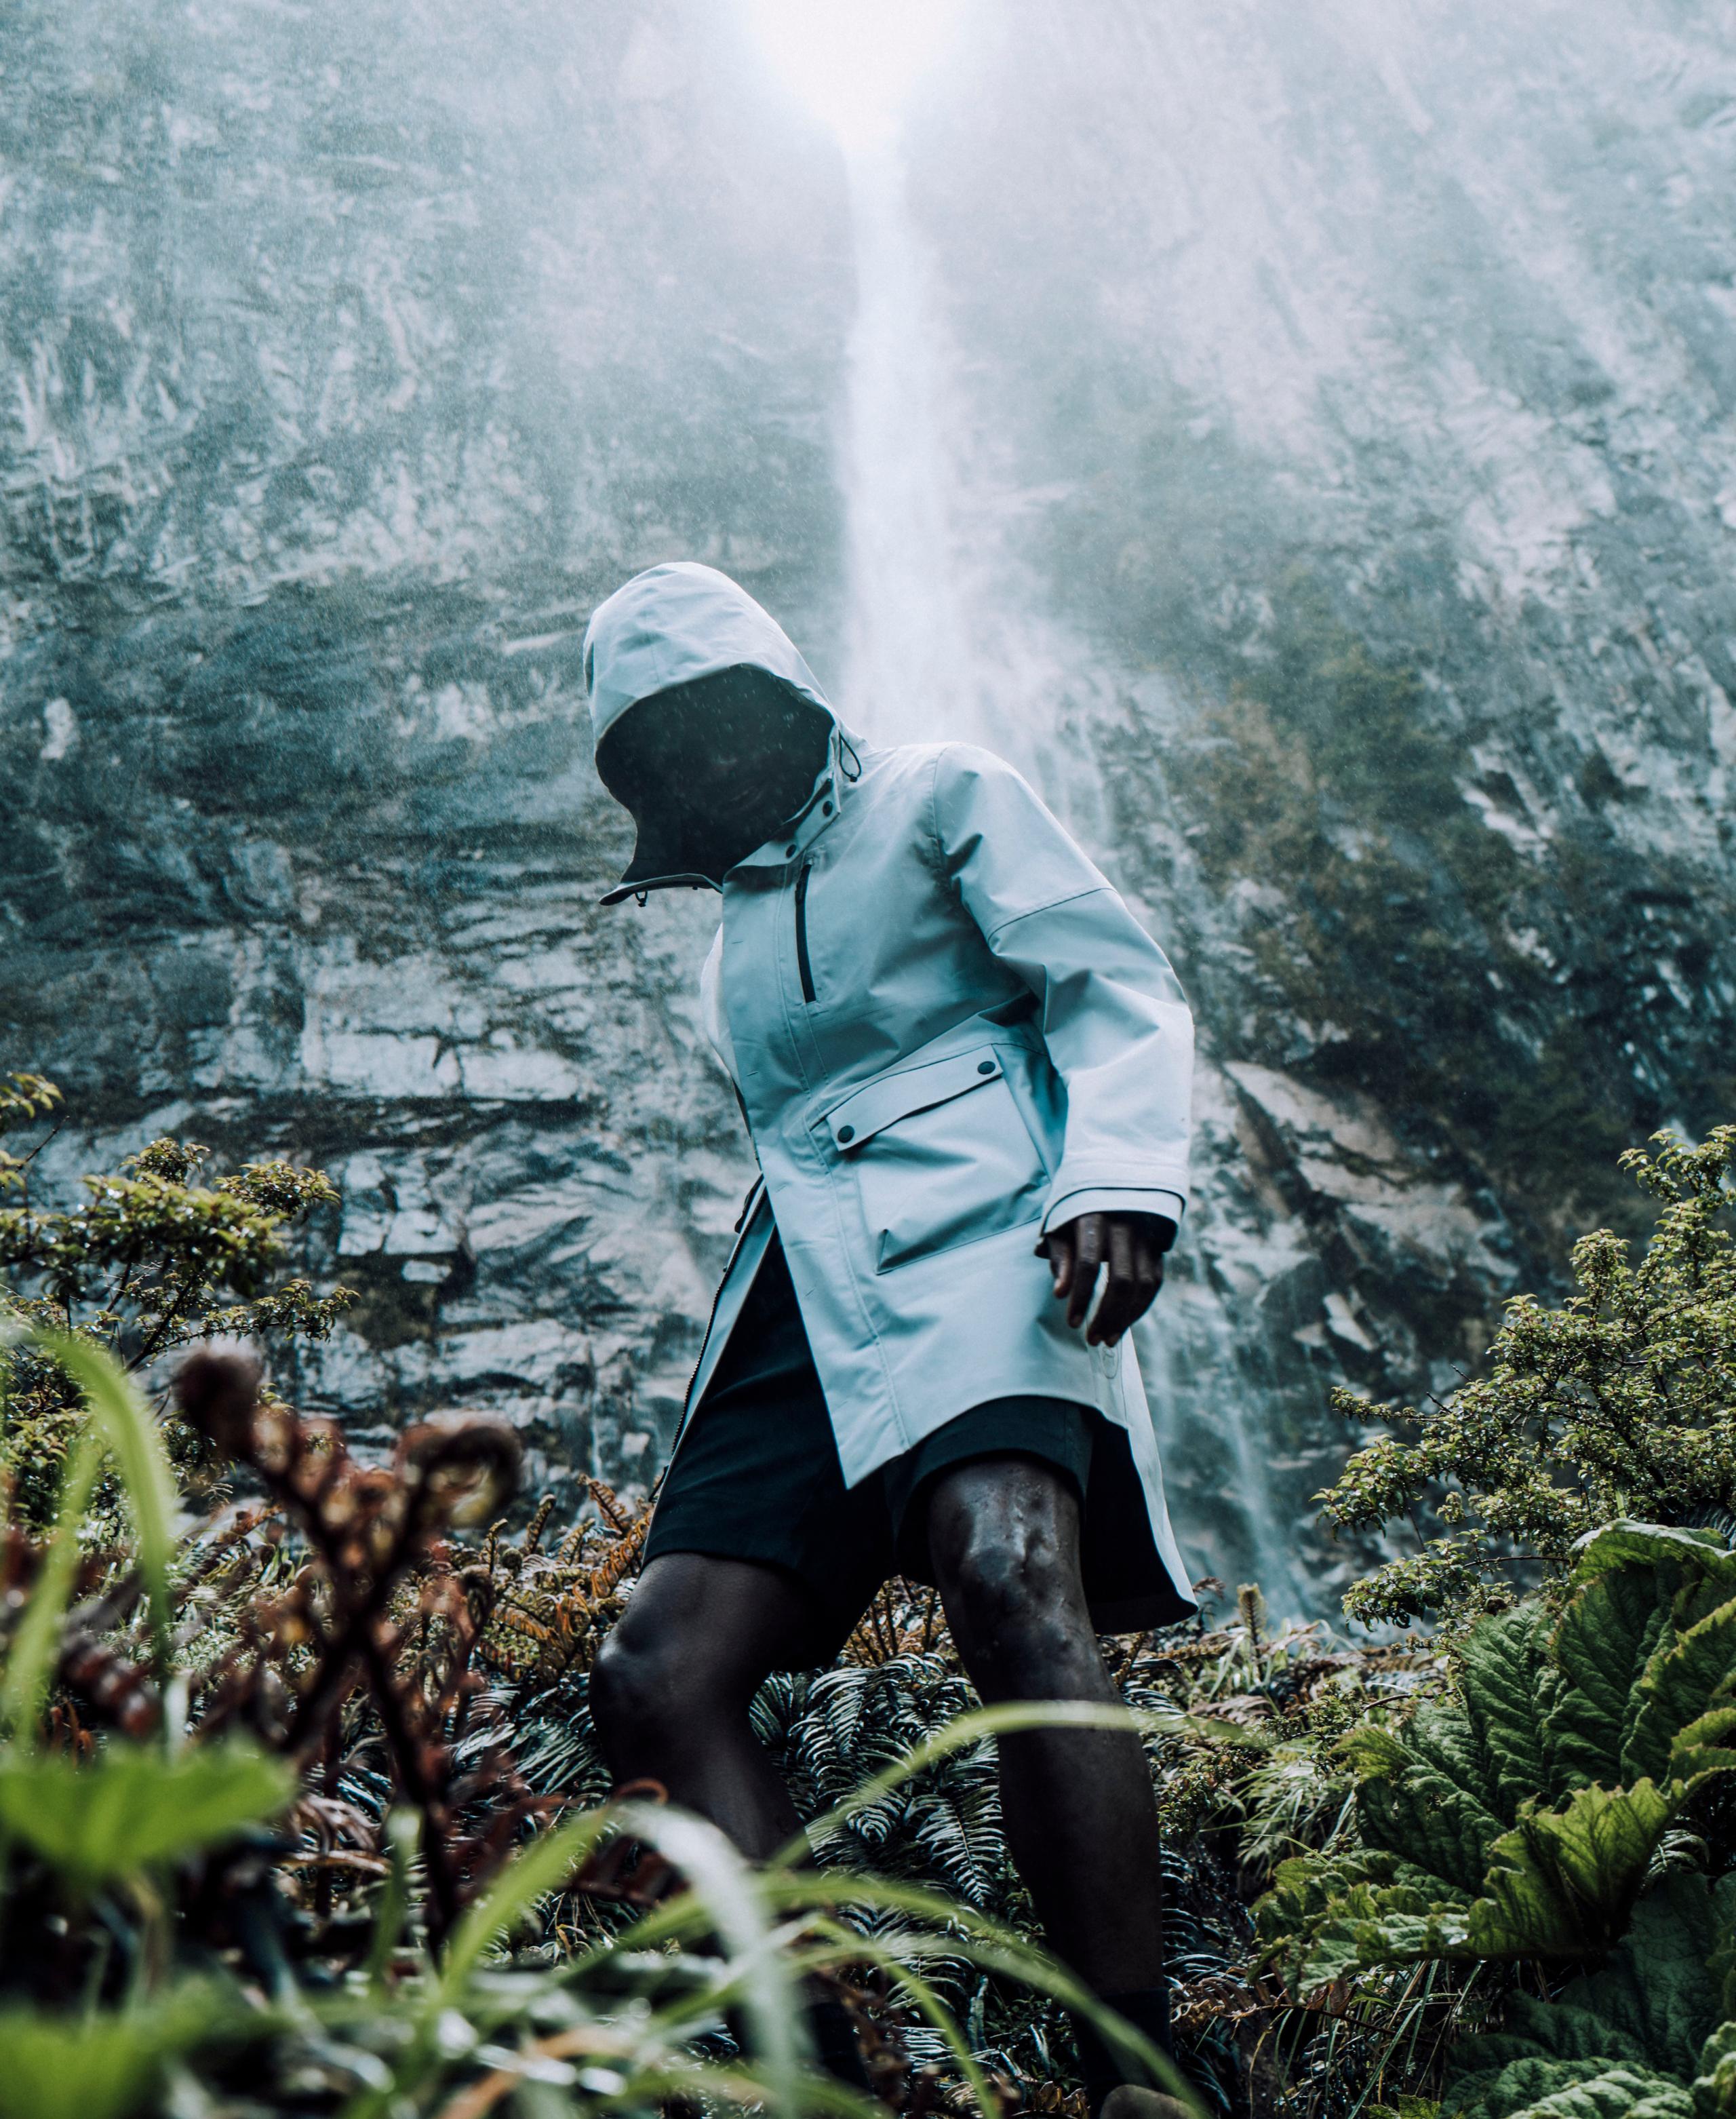 Man in Line Rain Poncho in rain from nearby waterfall in Patagonia